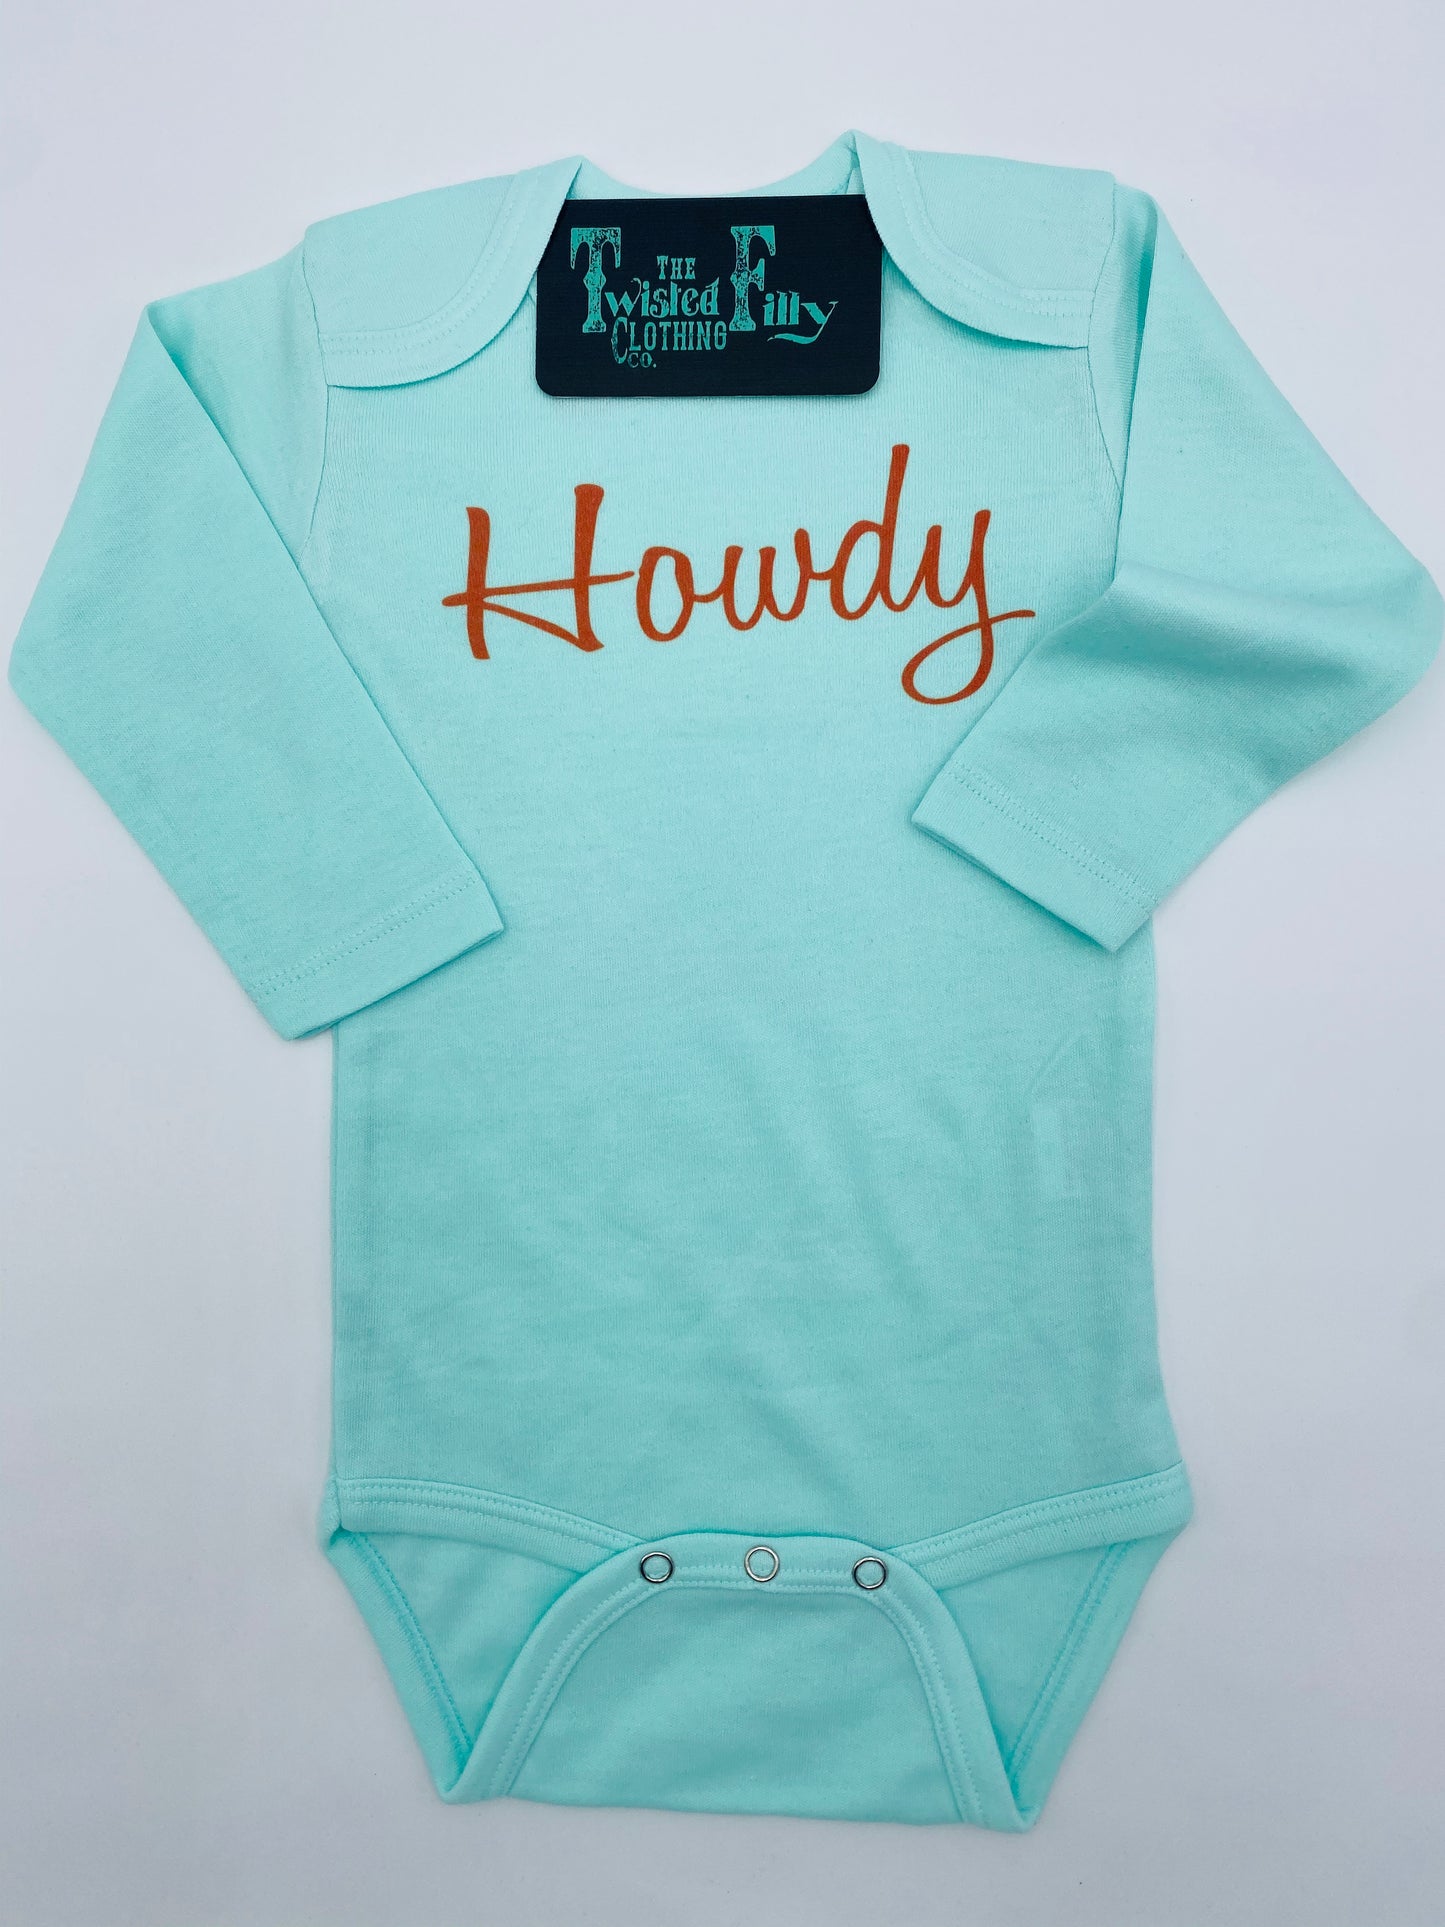 Howdy - L/S Infant One Piece - Turq